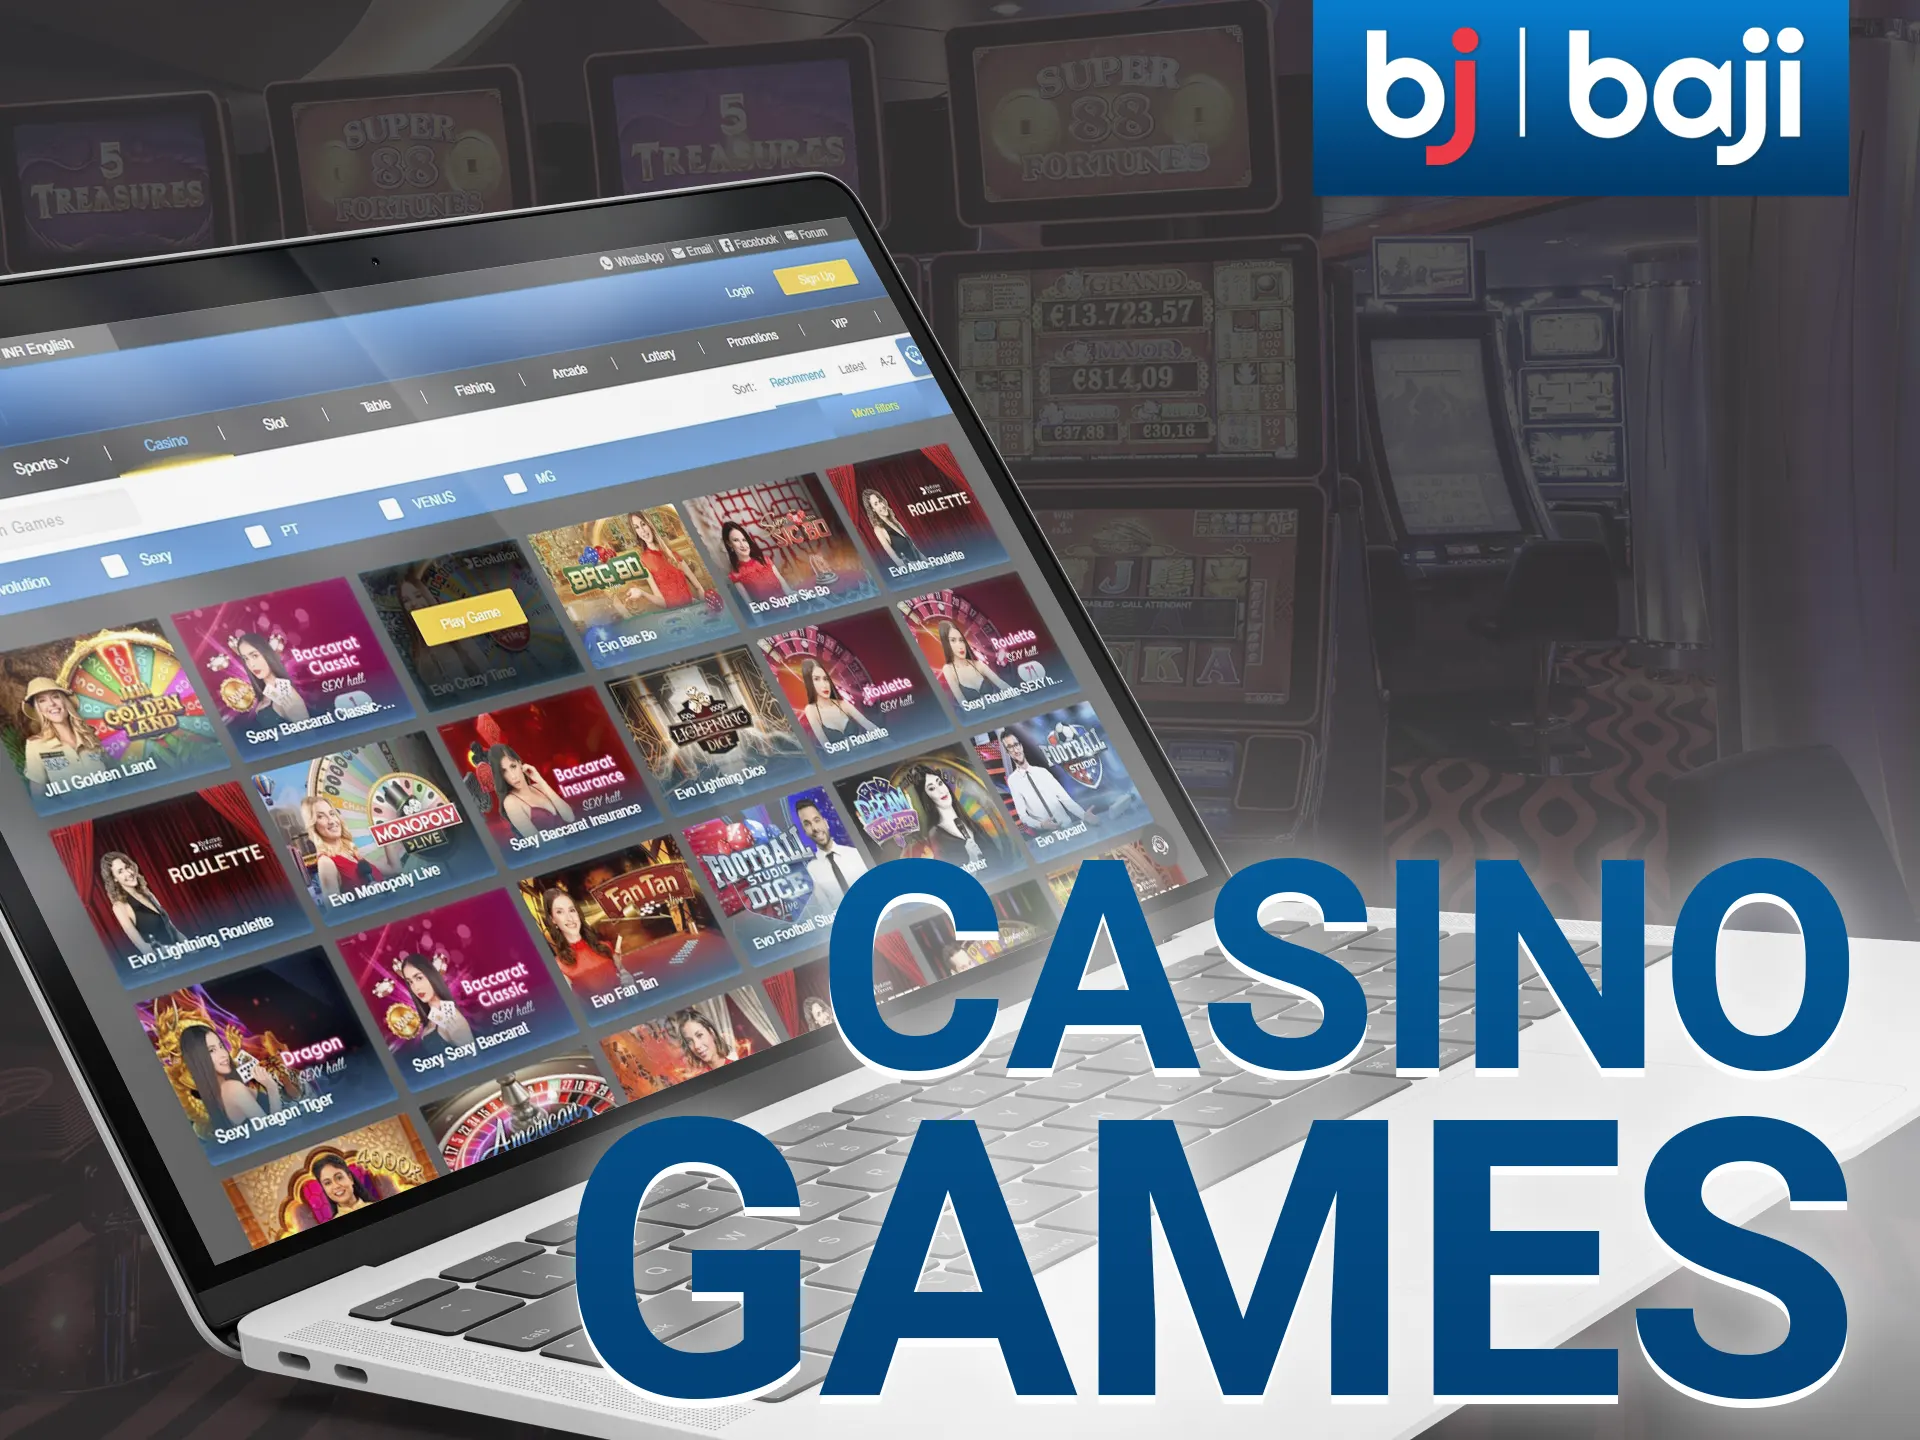 On the Baji Live website, you find lots of casino games.